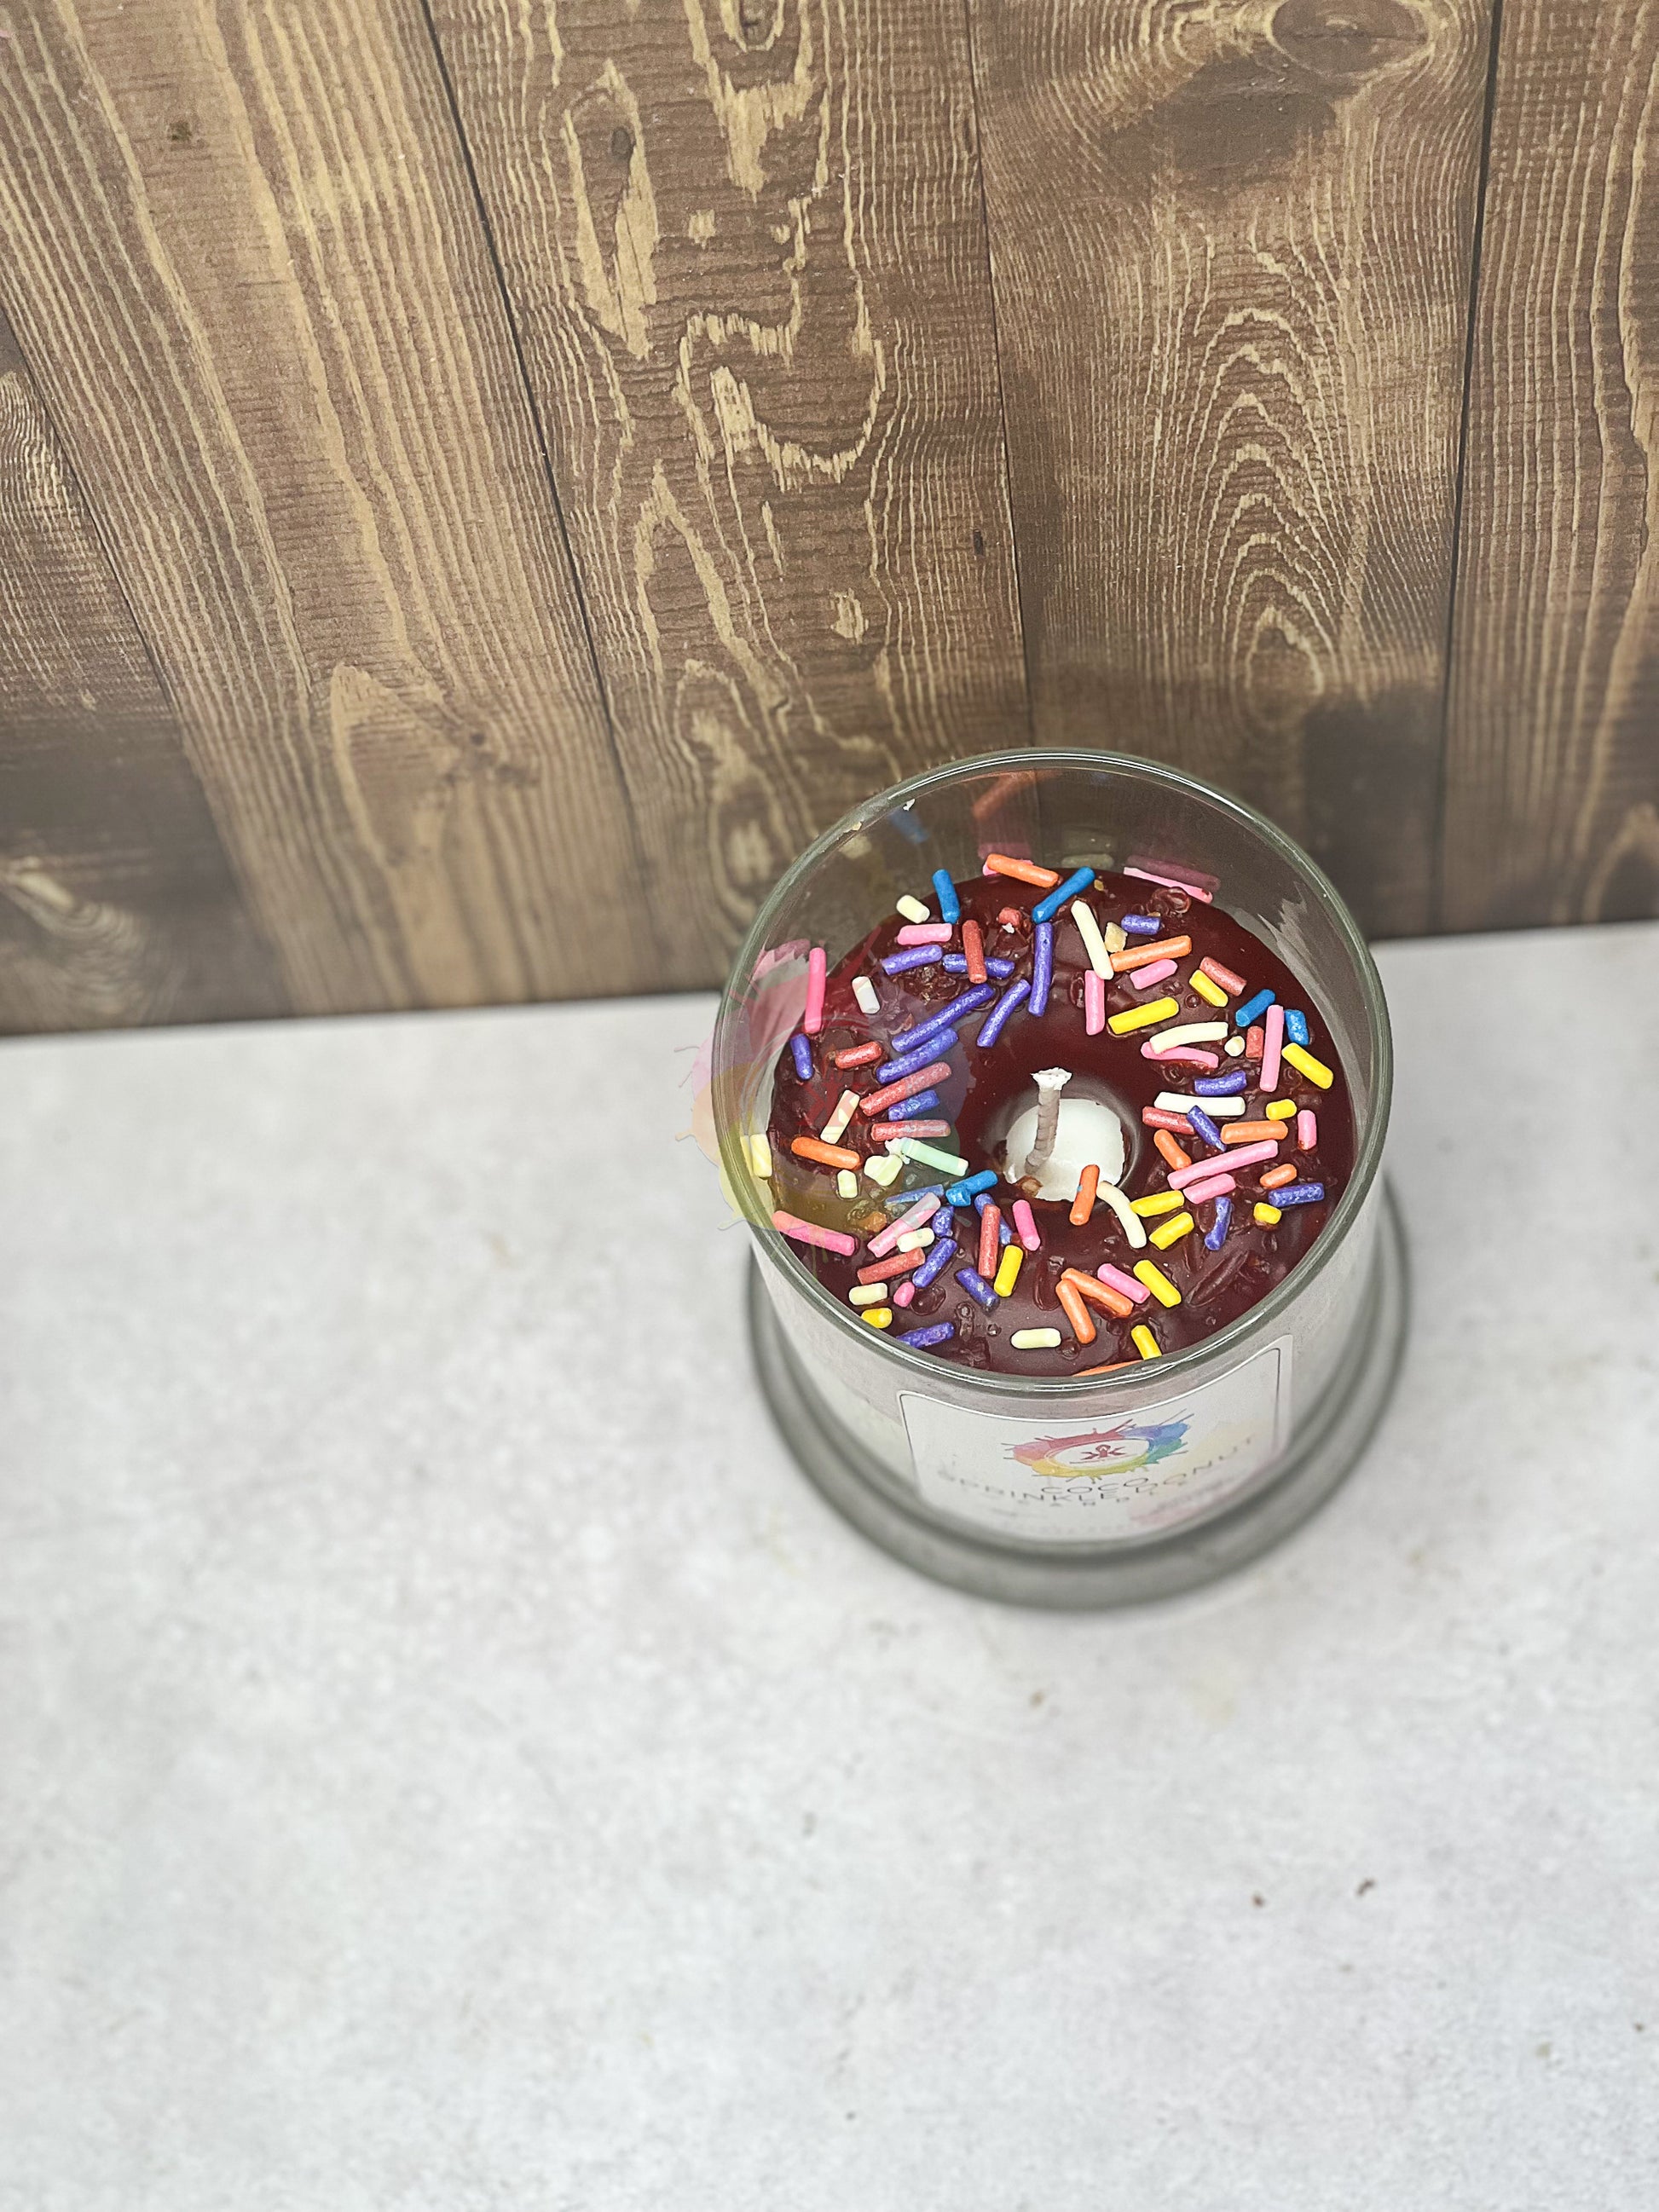 Jar candle donut. Chocolate frosted wax donut with sprinkles in the middle.